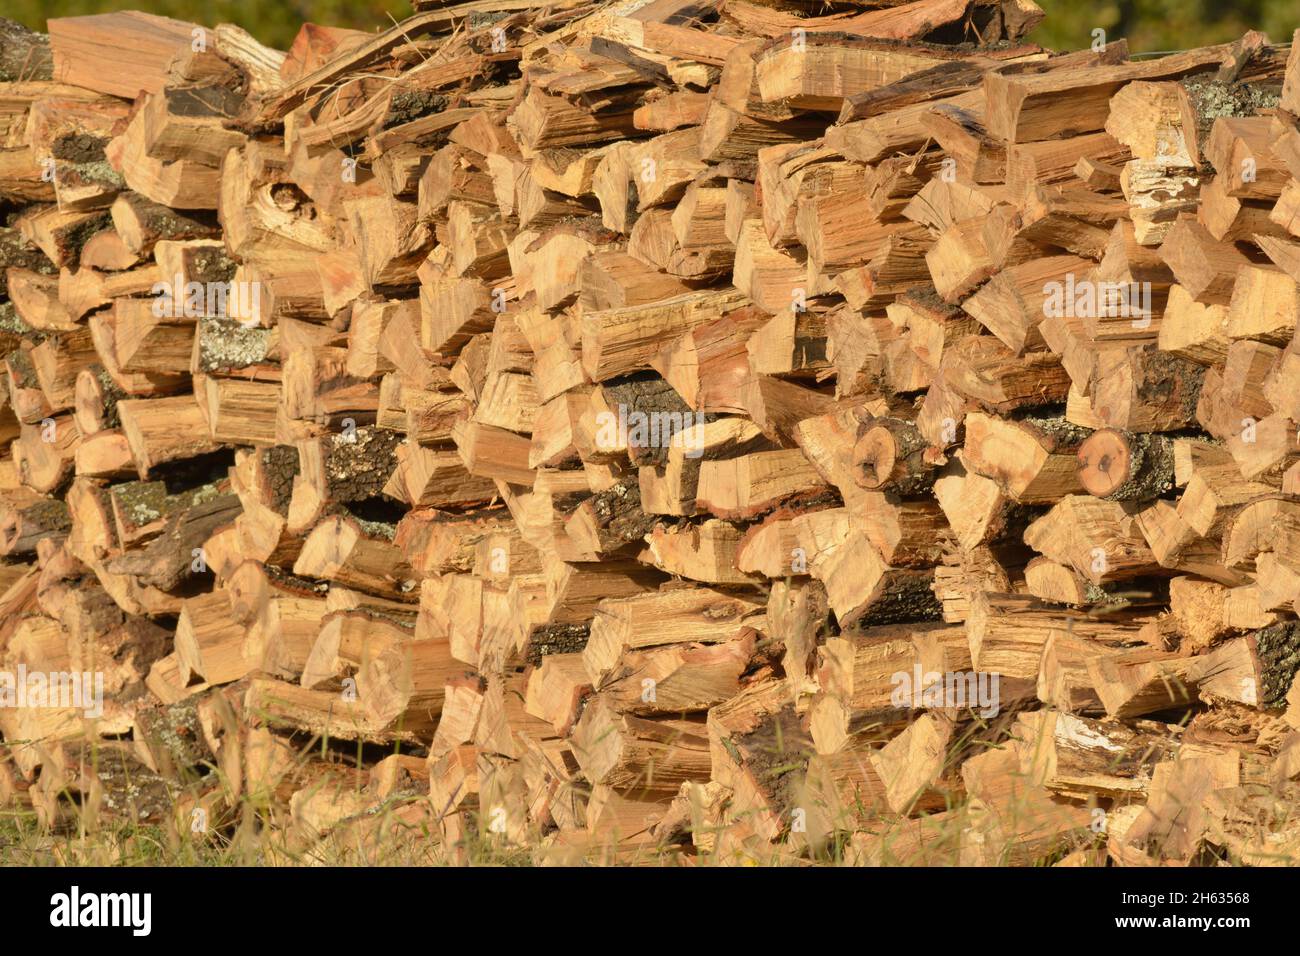 Prime hardwood firewood stacked in a pile Stock Photo